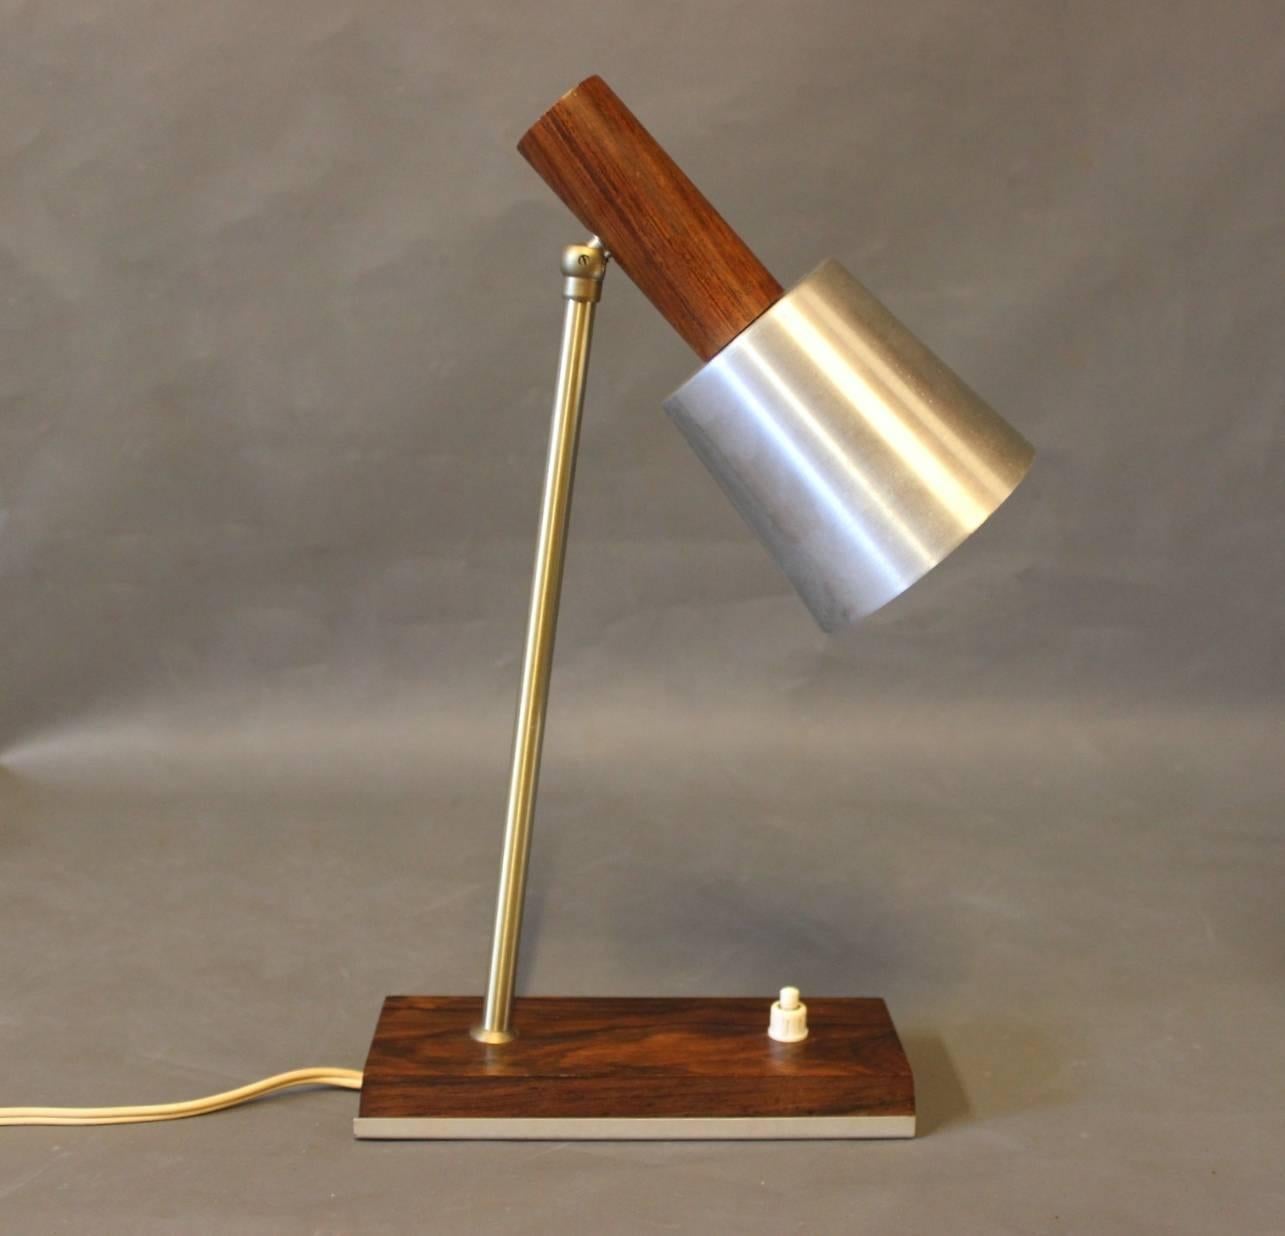 Scandinavian Modern Small Table Lamp with Shade of Steel and Frame of Teak, Danish Design, 1960s